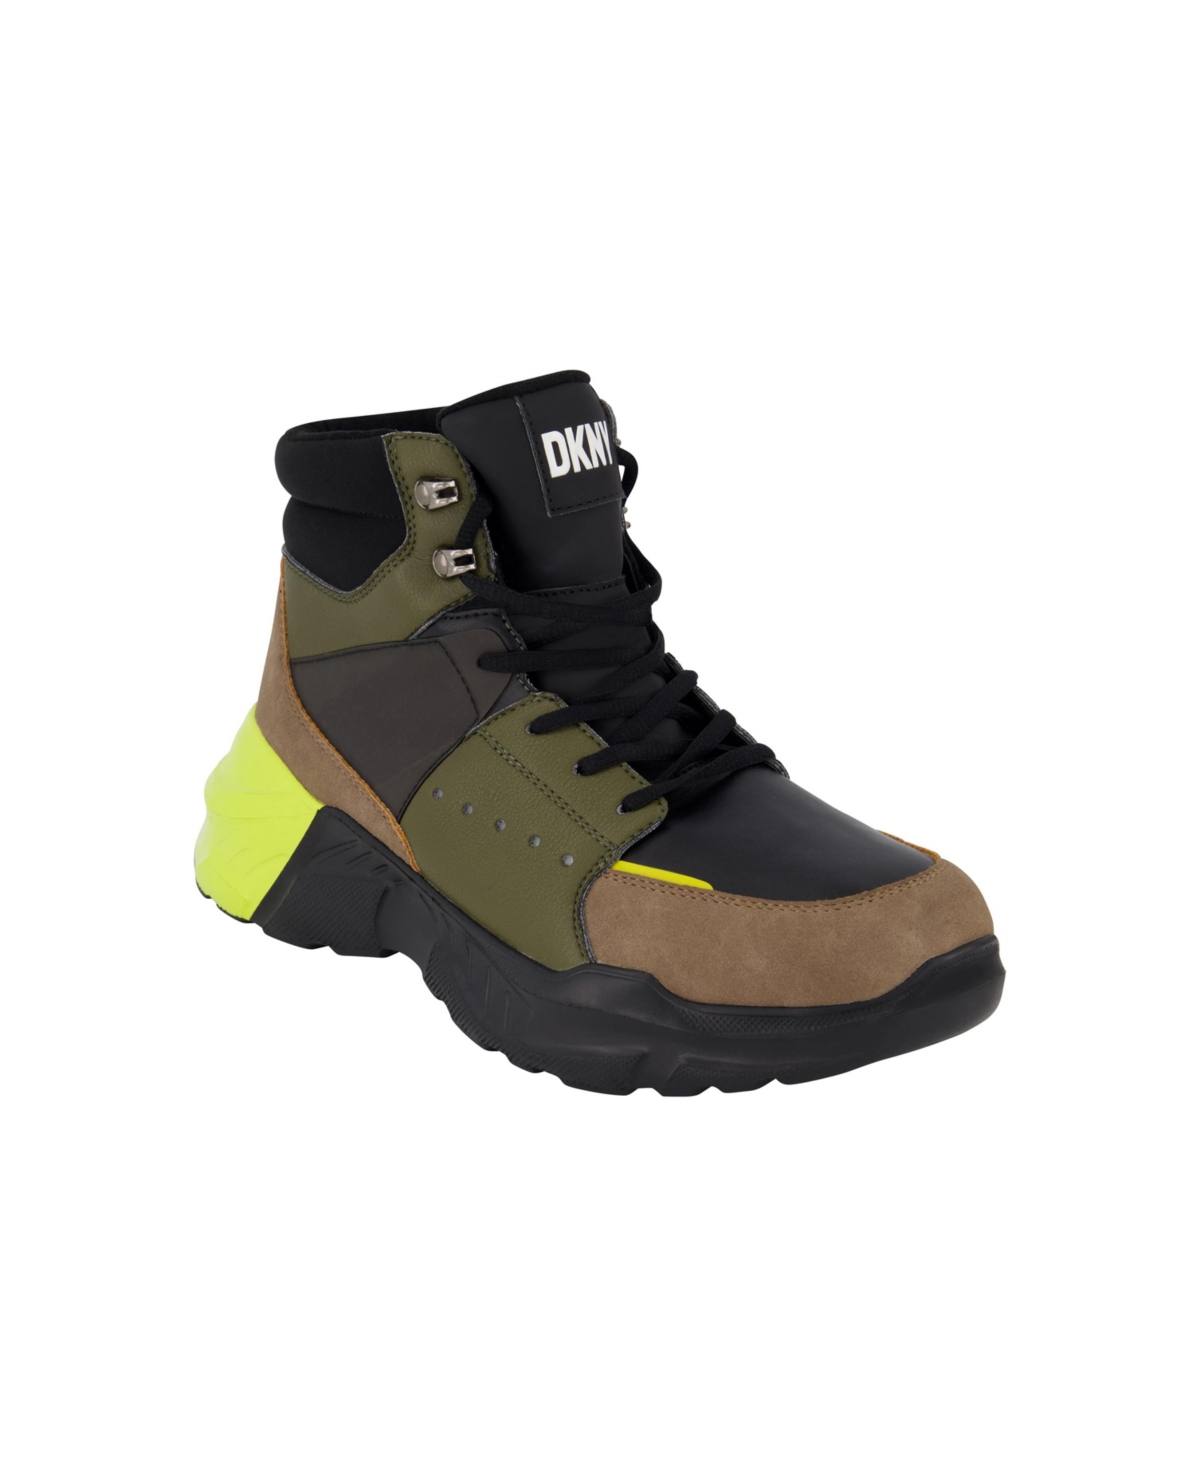 Dkny Men's Mixed Media Two Tone Lightweight Sole Hi Top Sneakers In Olive